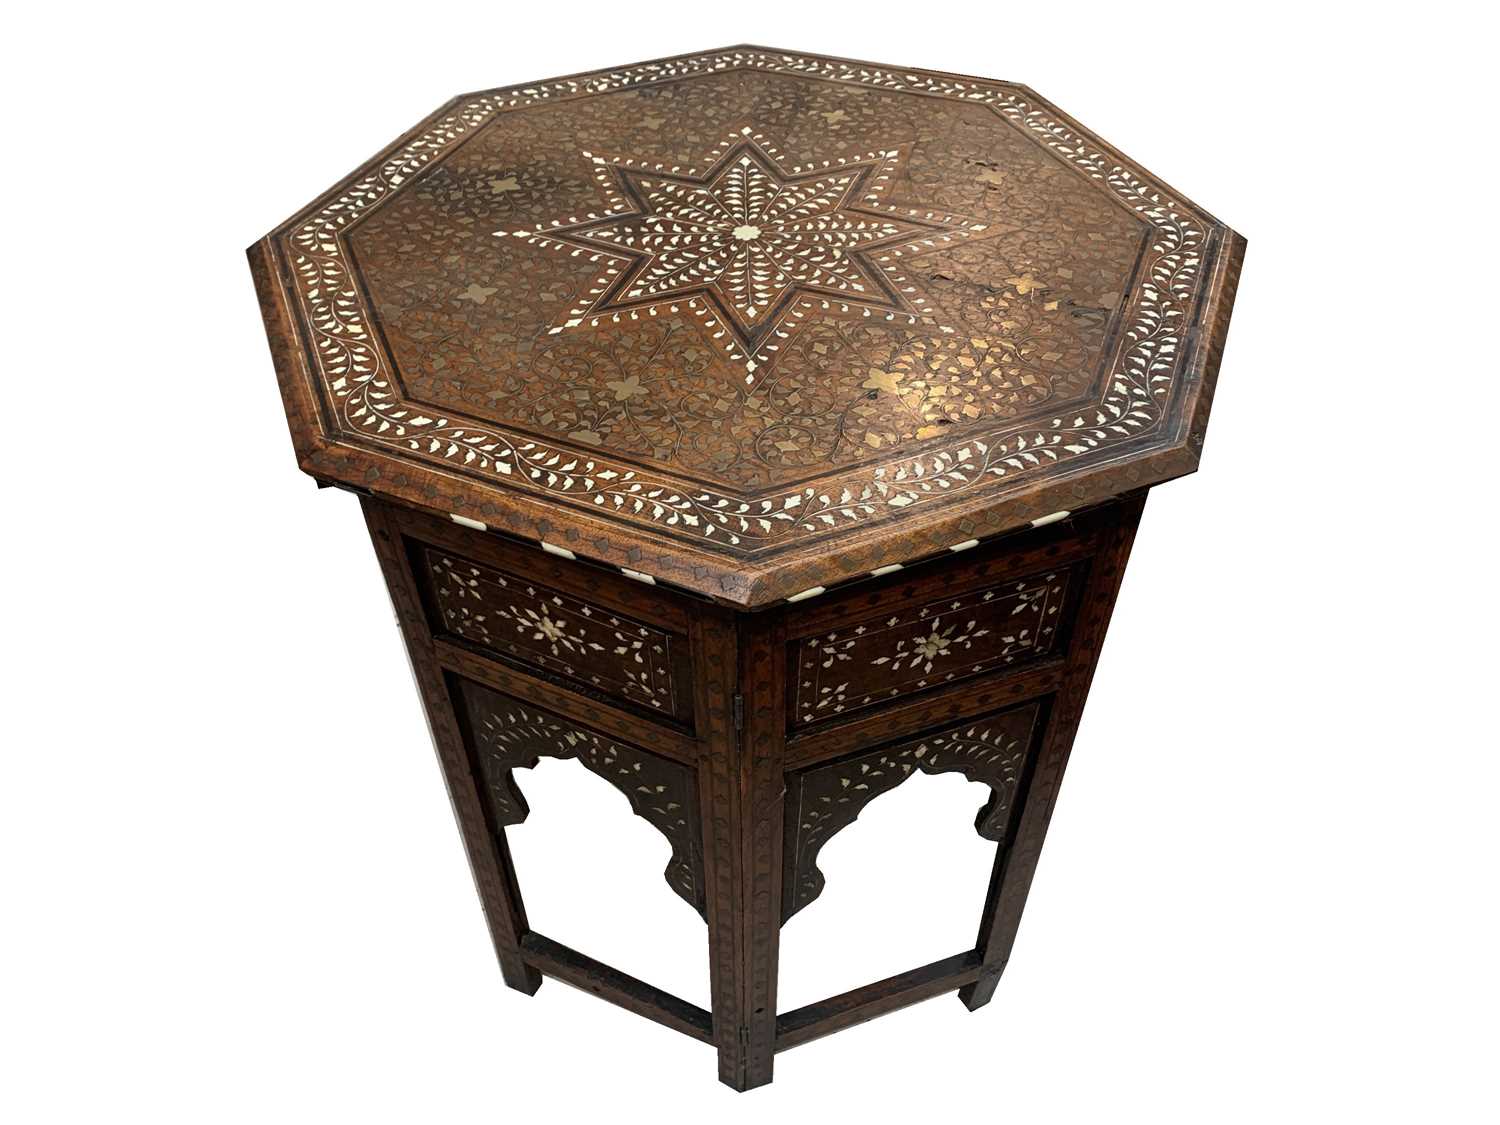 A Hoshiarpur folding octagonal occasional table, Northern India, circa 1880, inlaid with bone and